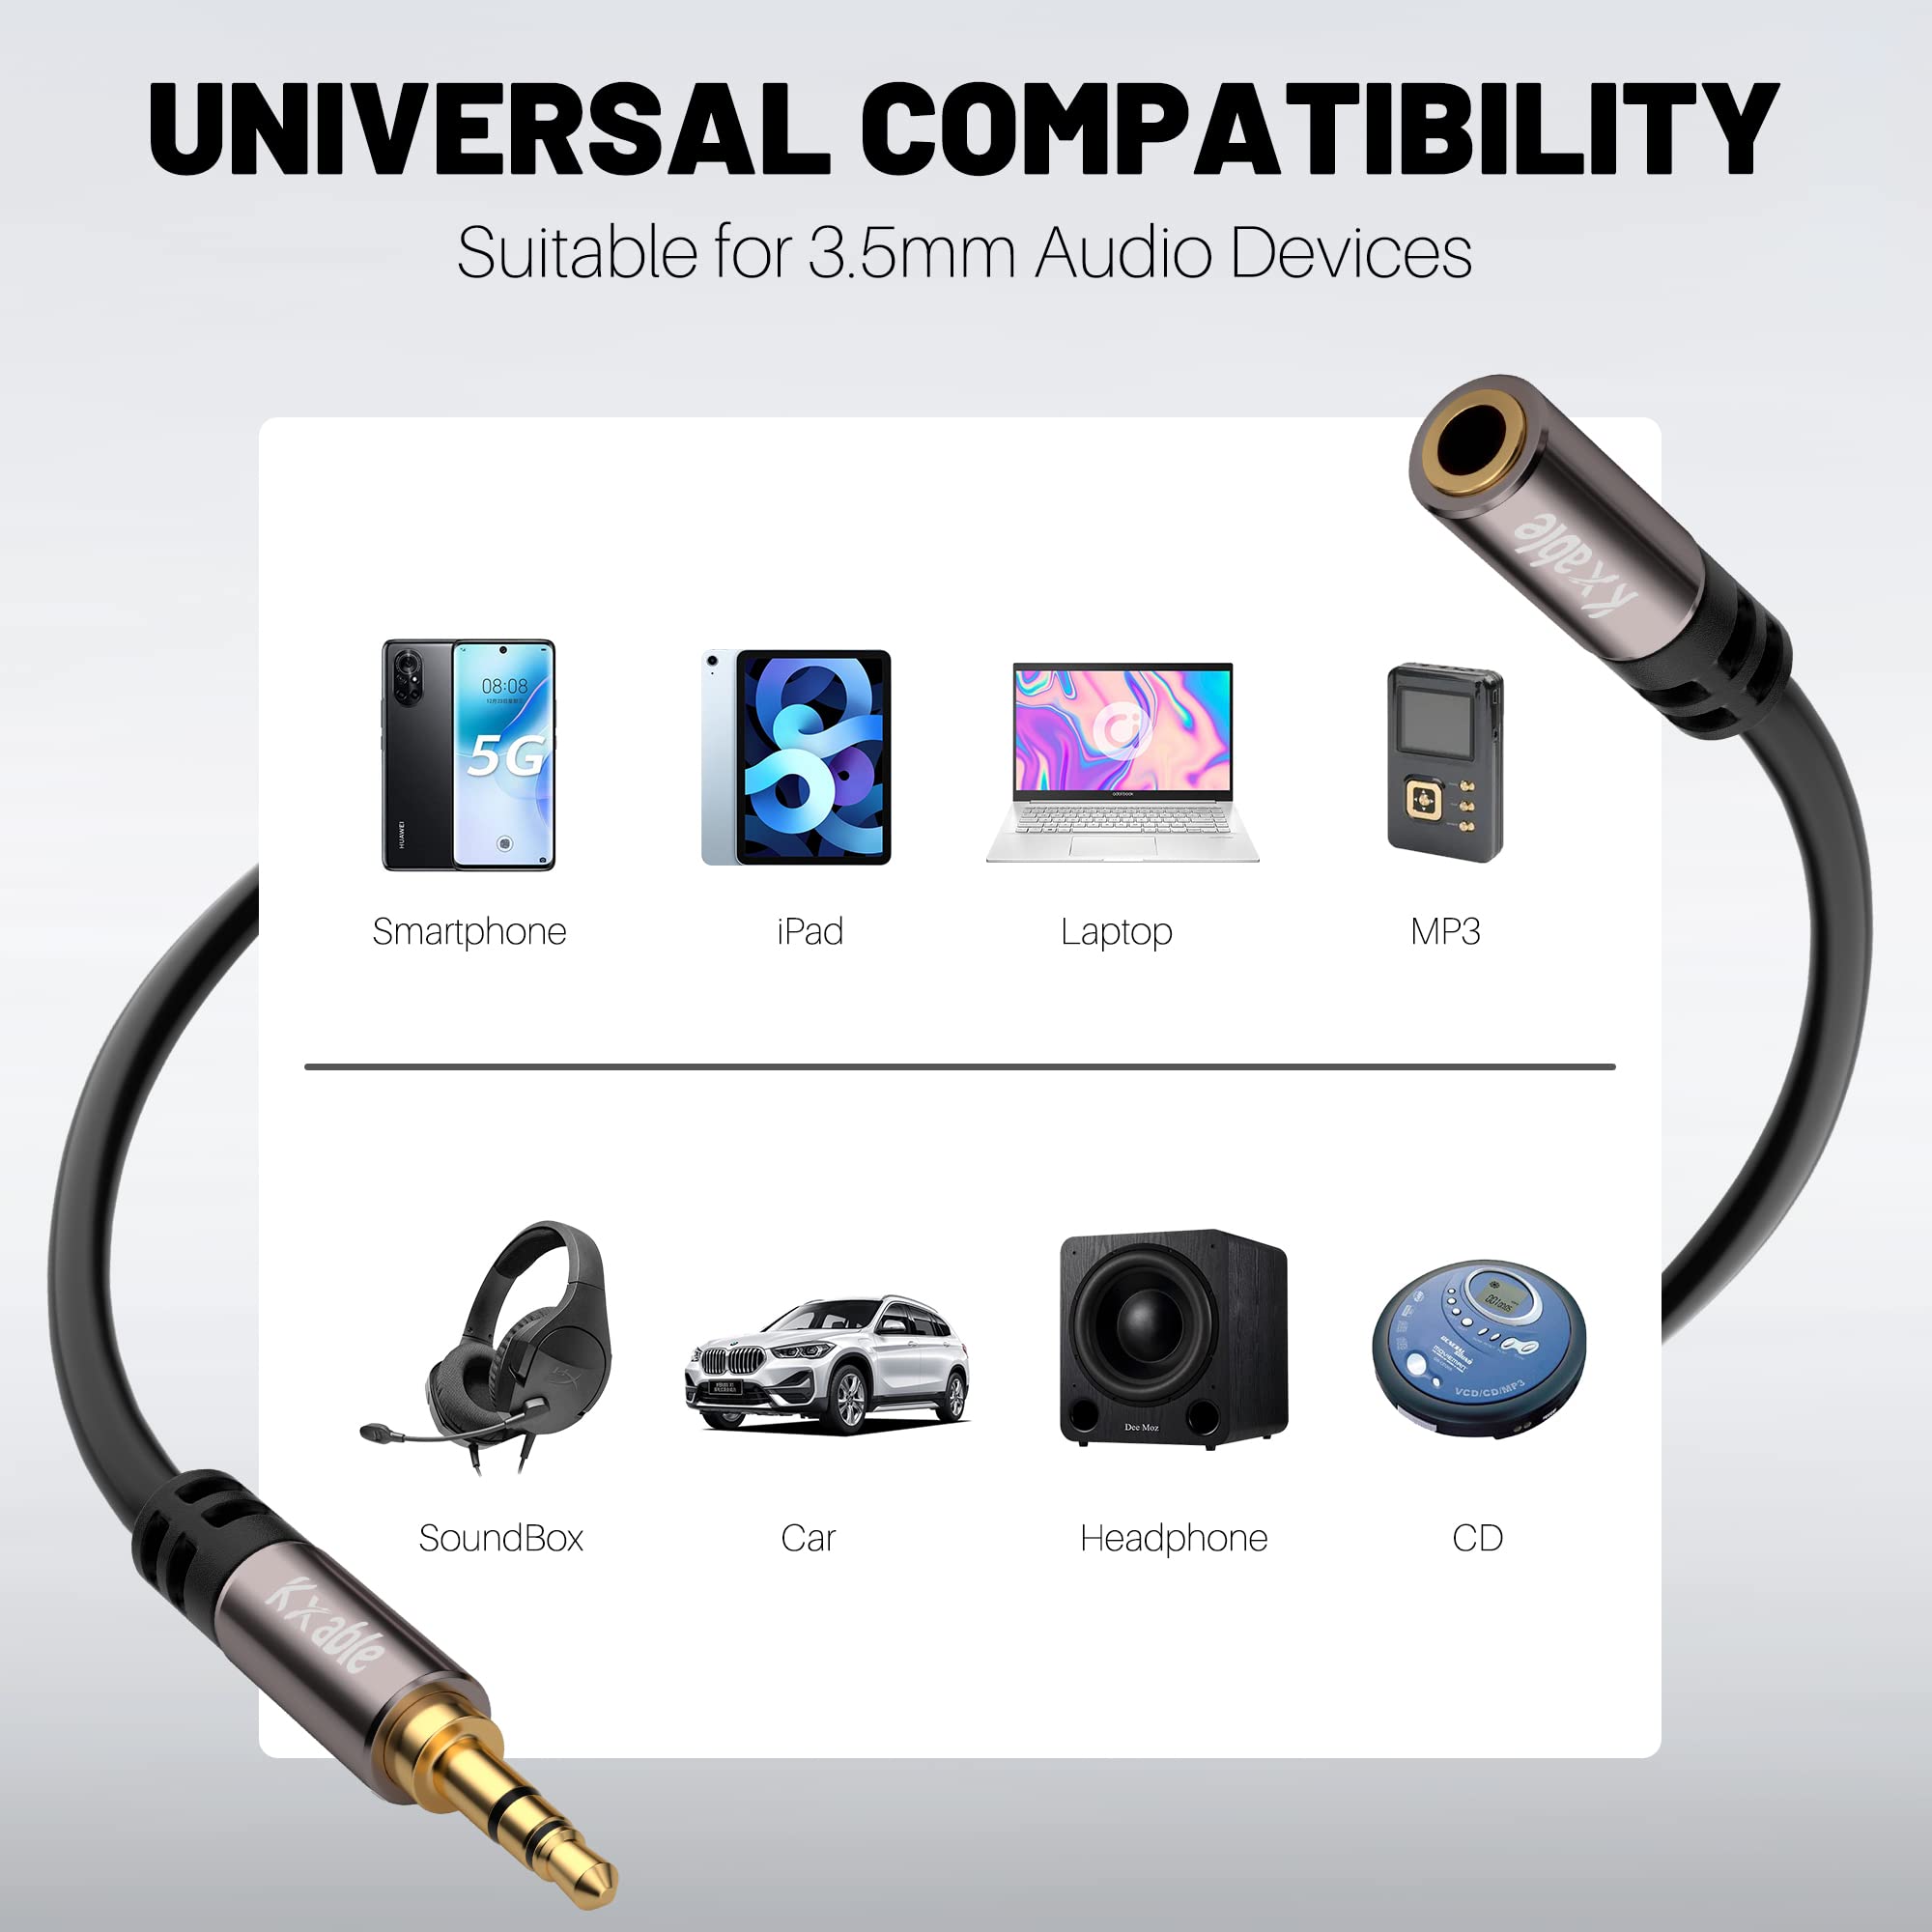 3.5mm Extension Cable 50 Feet, Long Male to Female Auxiliary Audio Stereo Cable, Headphone Extension Cord, Hi-Fi Sound, Gold Plated Connectors, OFC Core, Black Cable (with 5 pcs Cable Ties) - 50ft